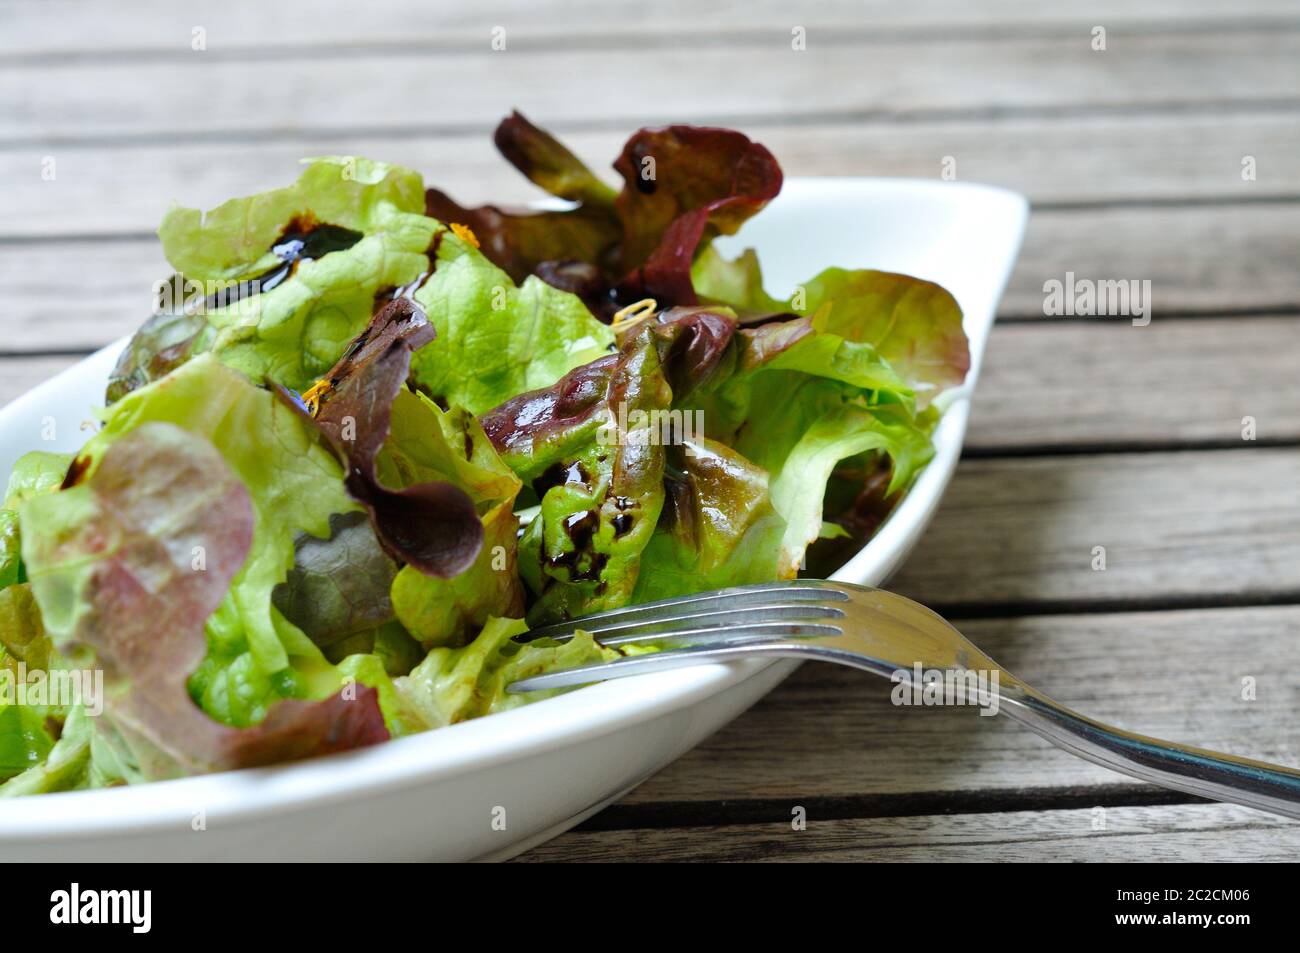 Fresh salad on a wooden table Stock Photo